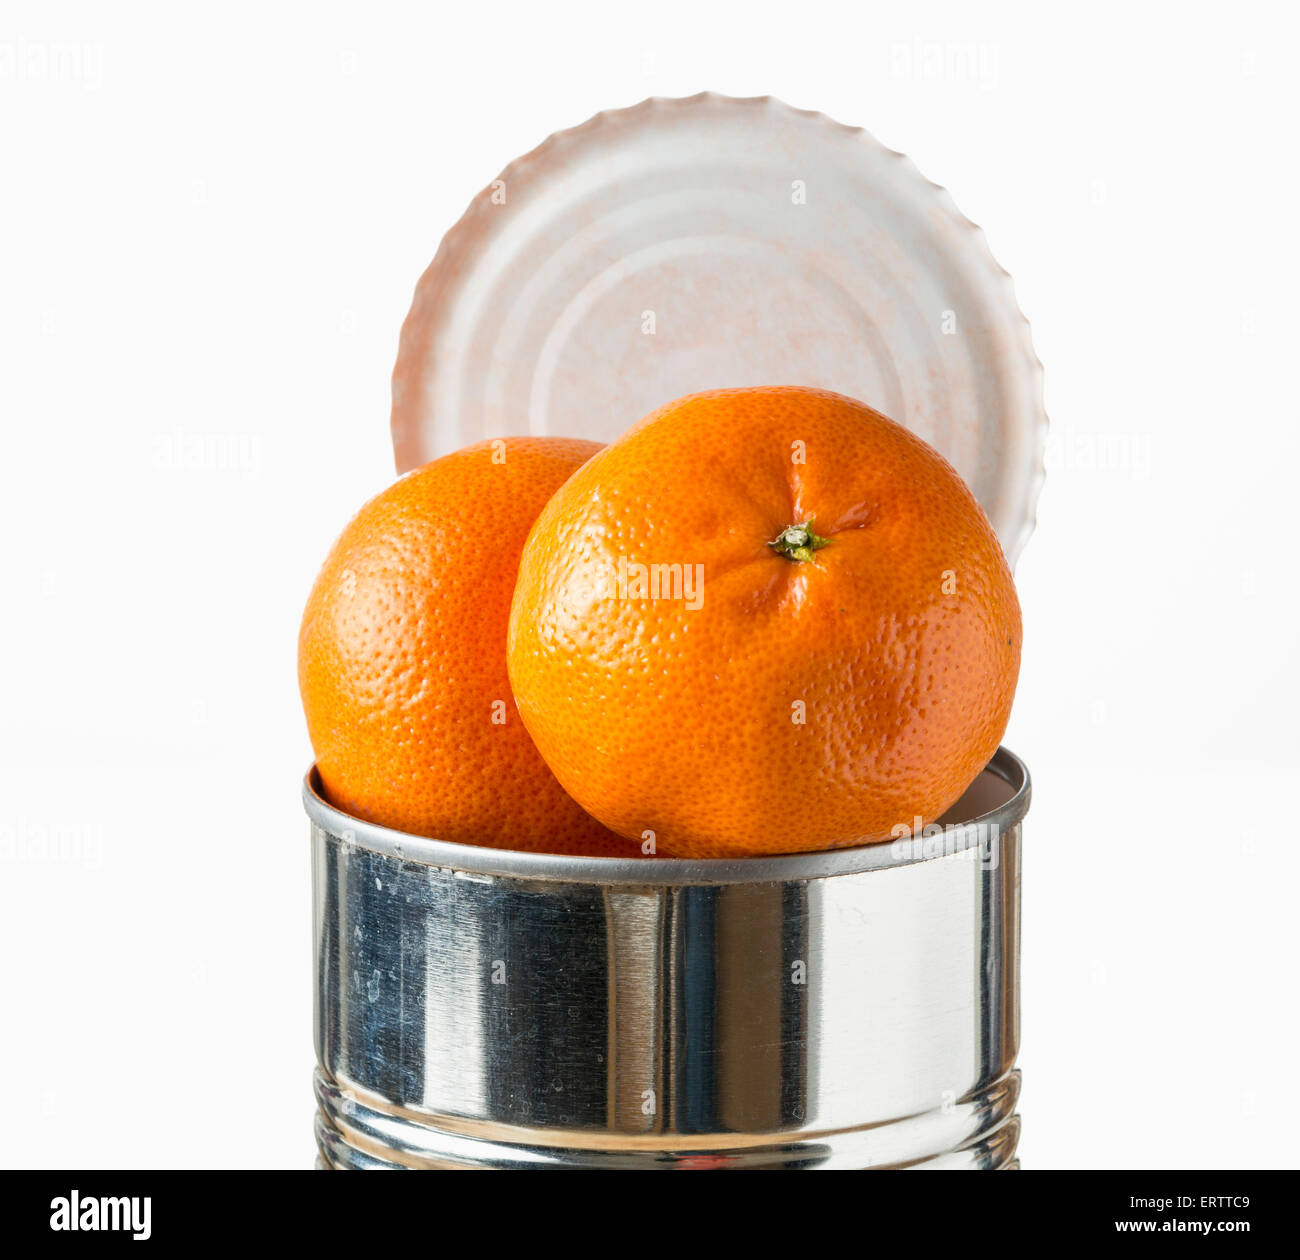 Oranges / satsumas fruit heaped inside opened tin can - fresh food coming in cans concept Stock Photo